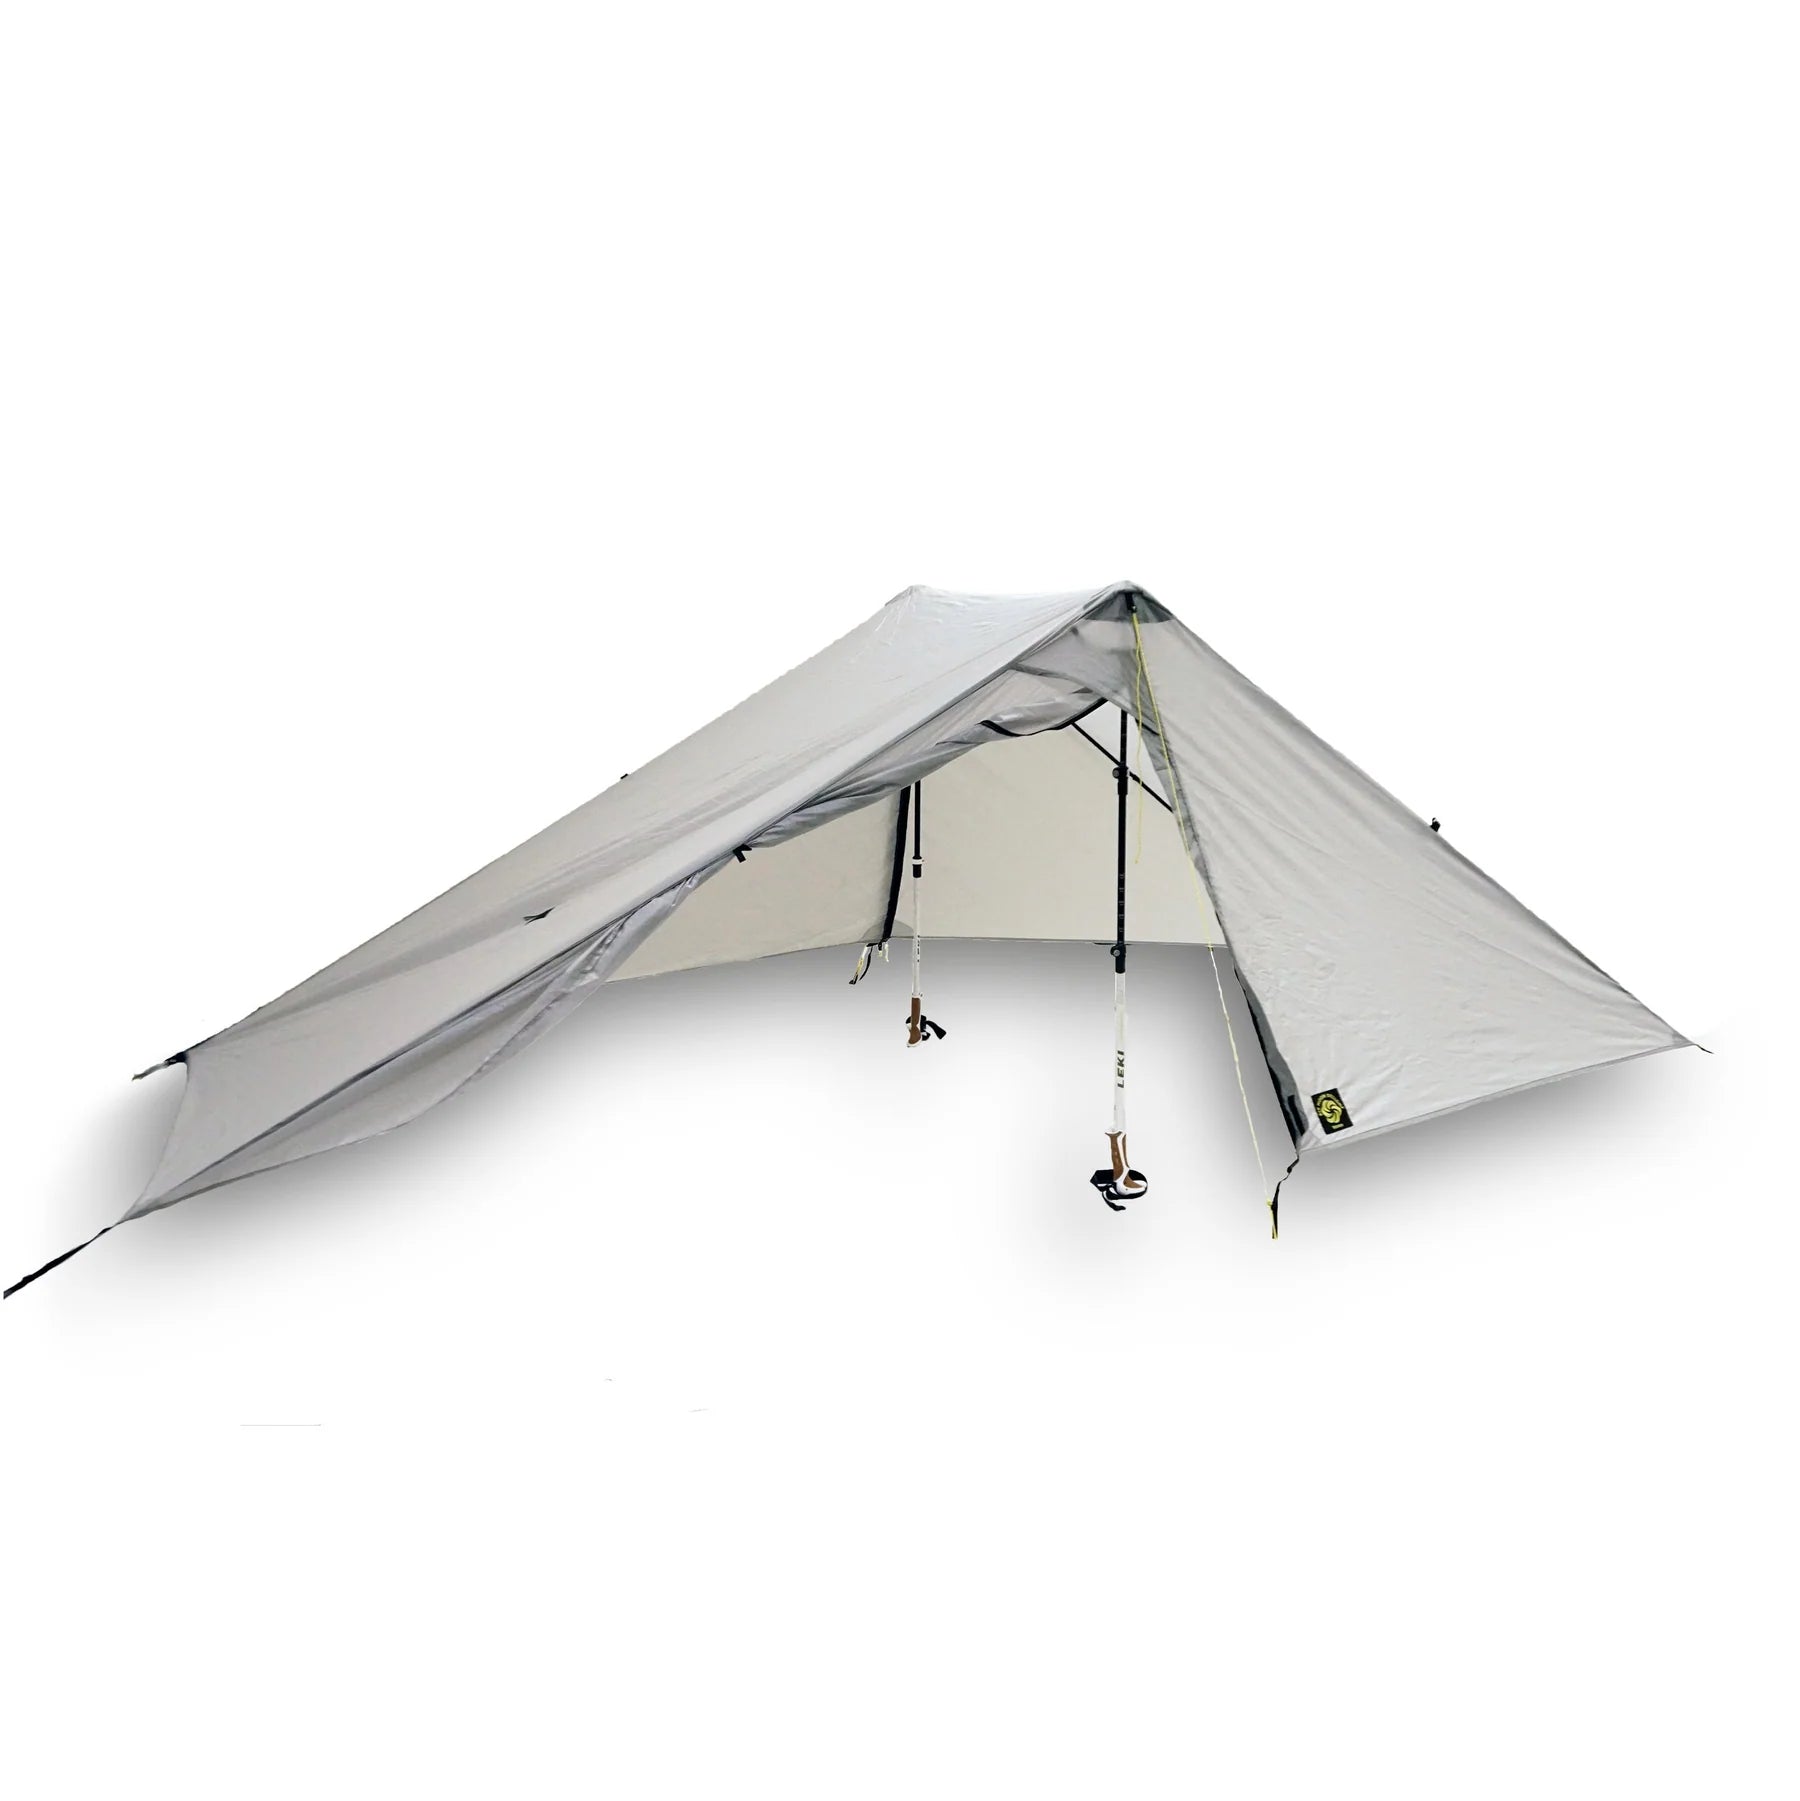 Six Moon Designs Haven Two-Person Ultralight Tent